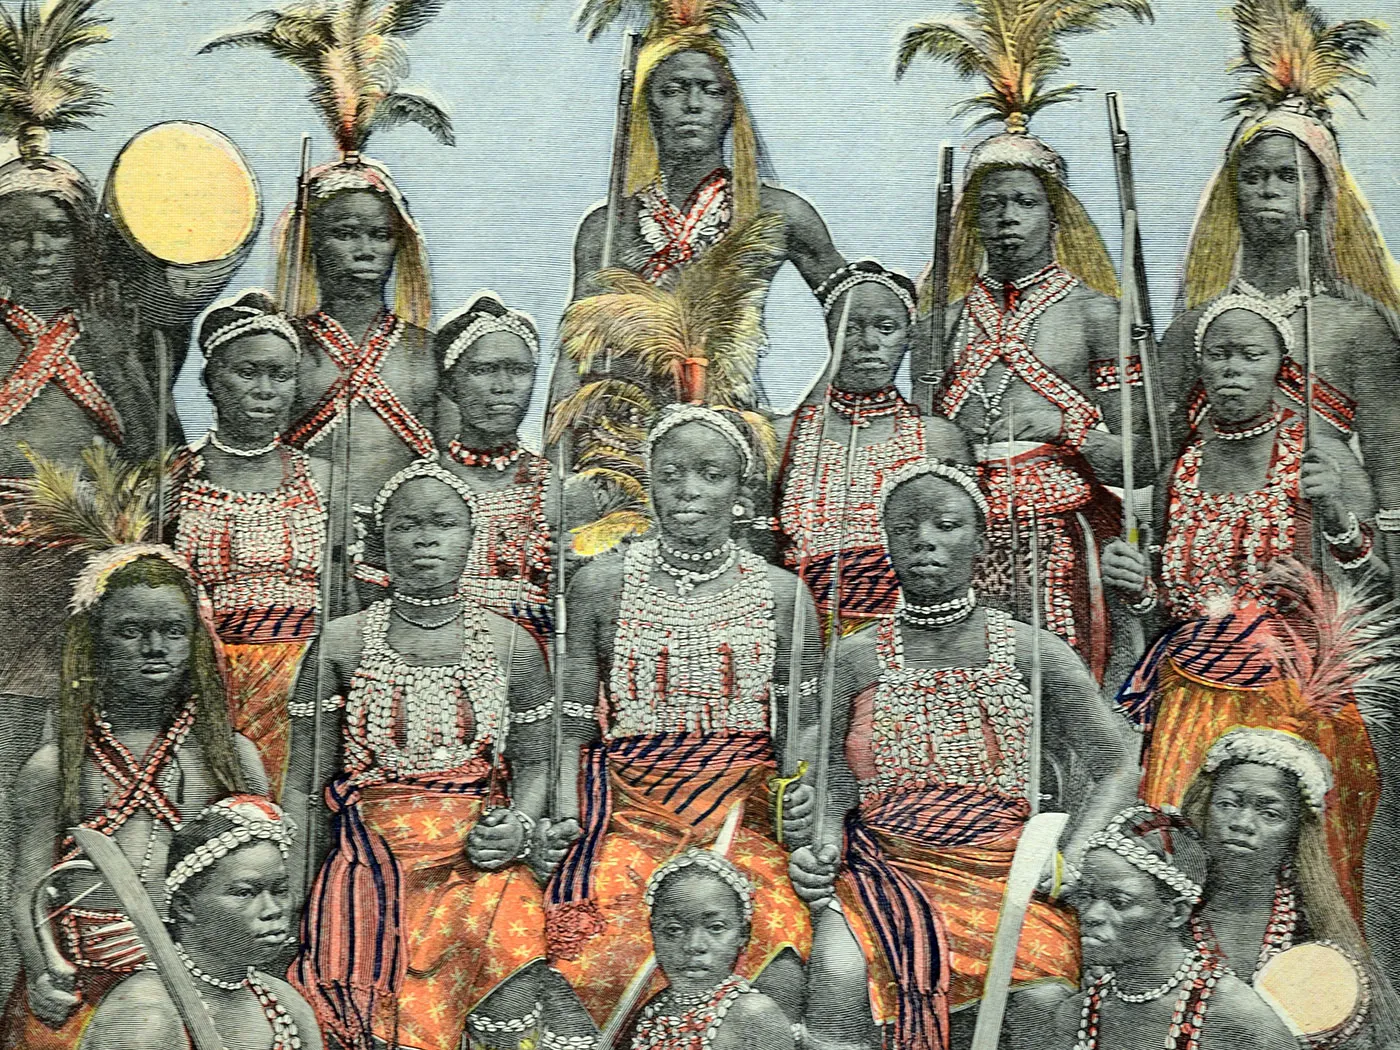 The Real History Behind The Woman King The Agojie Warriors Of